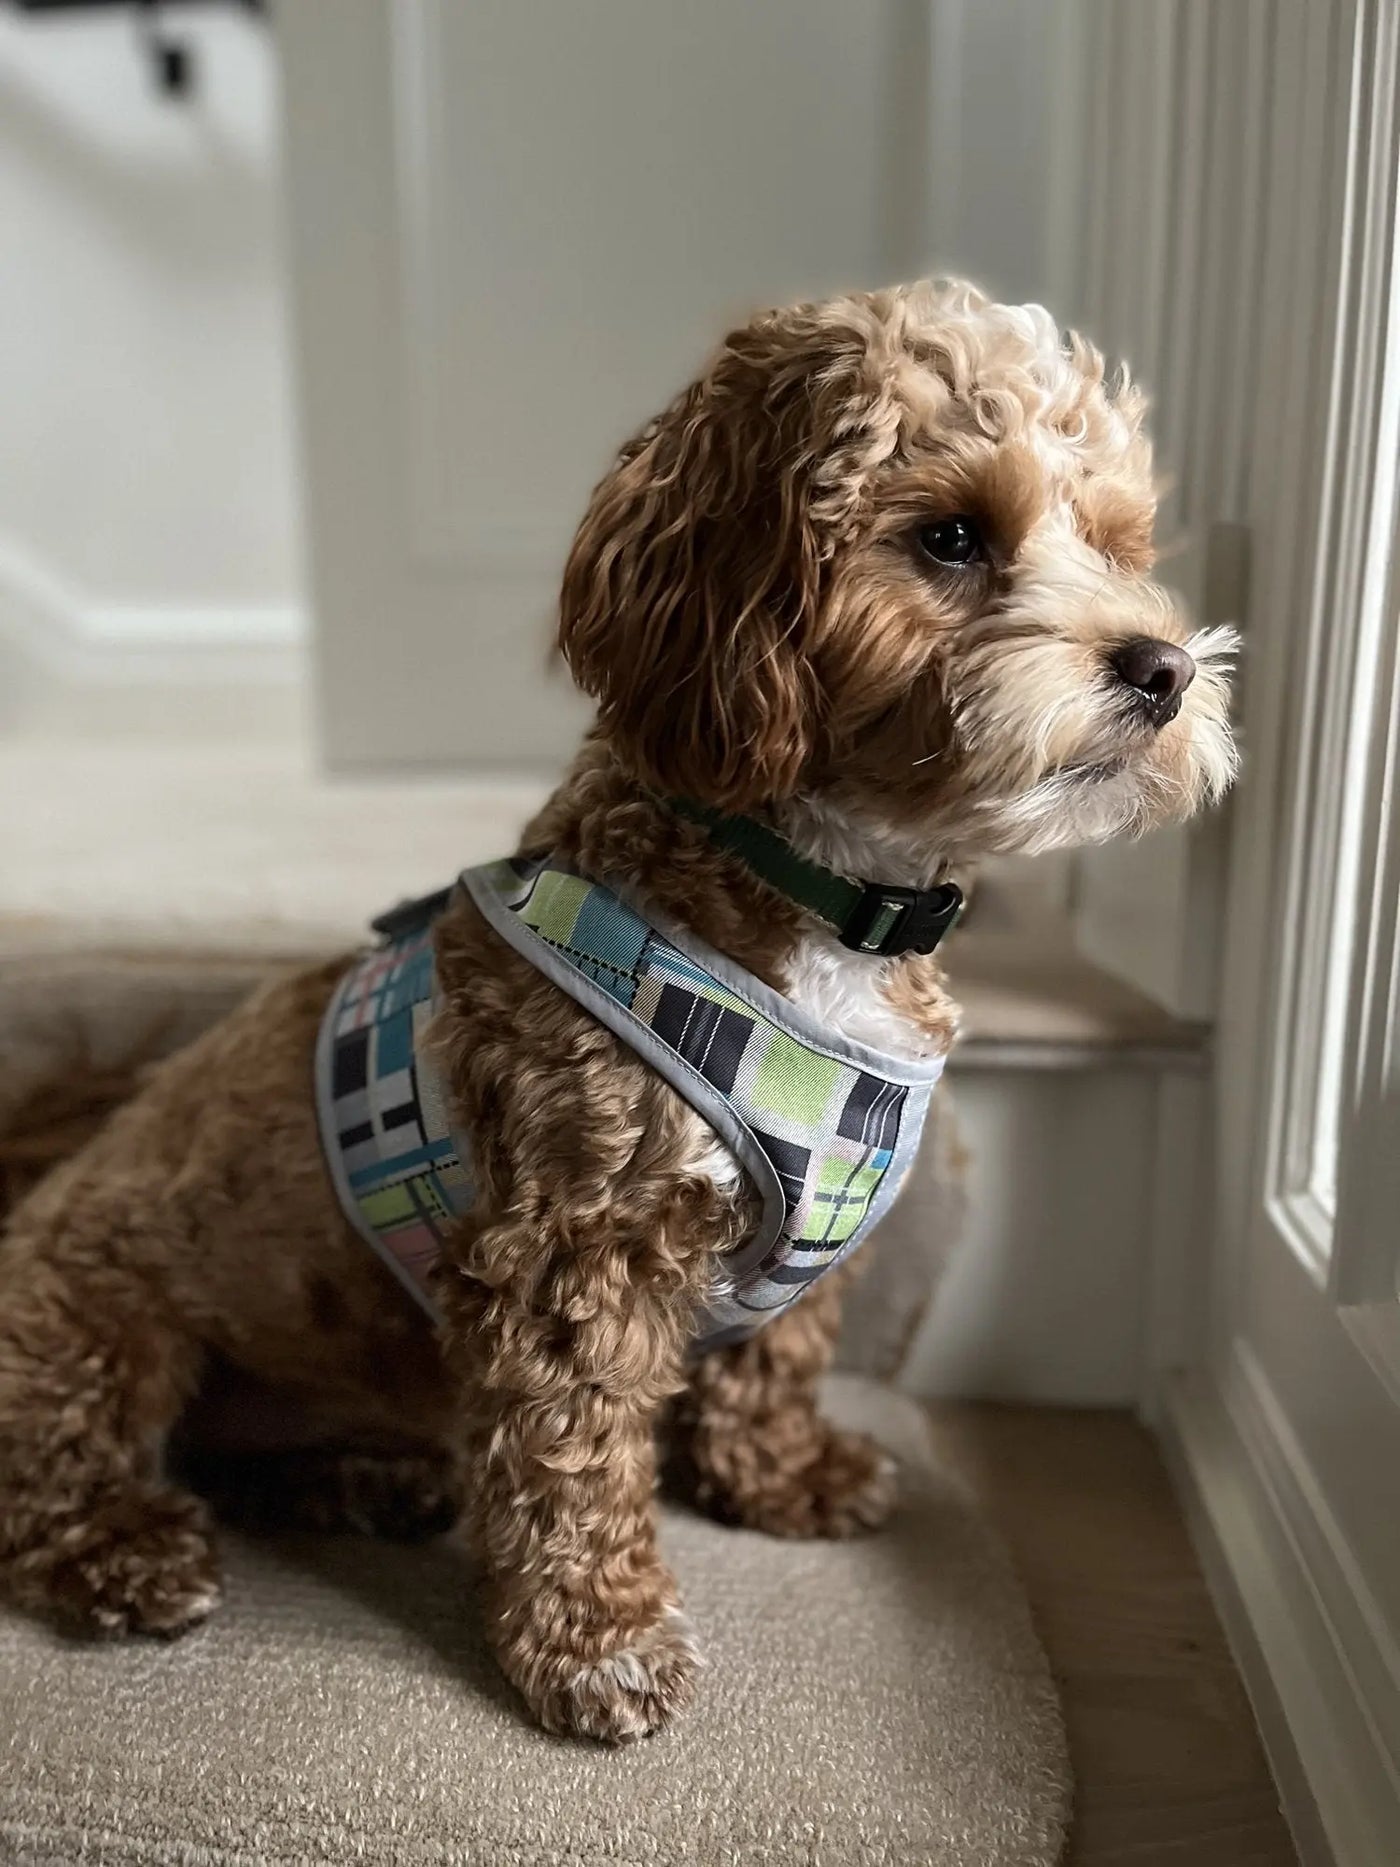 Adding velcro patches to your dog harness 